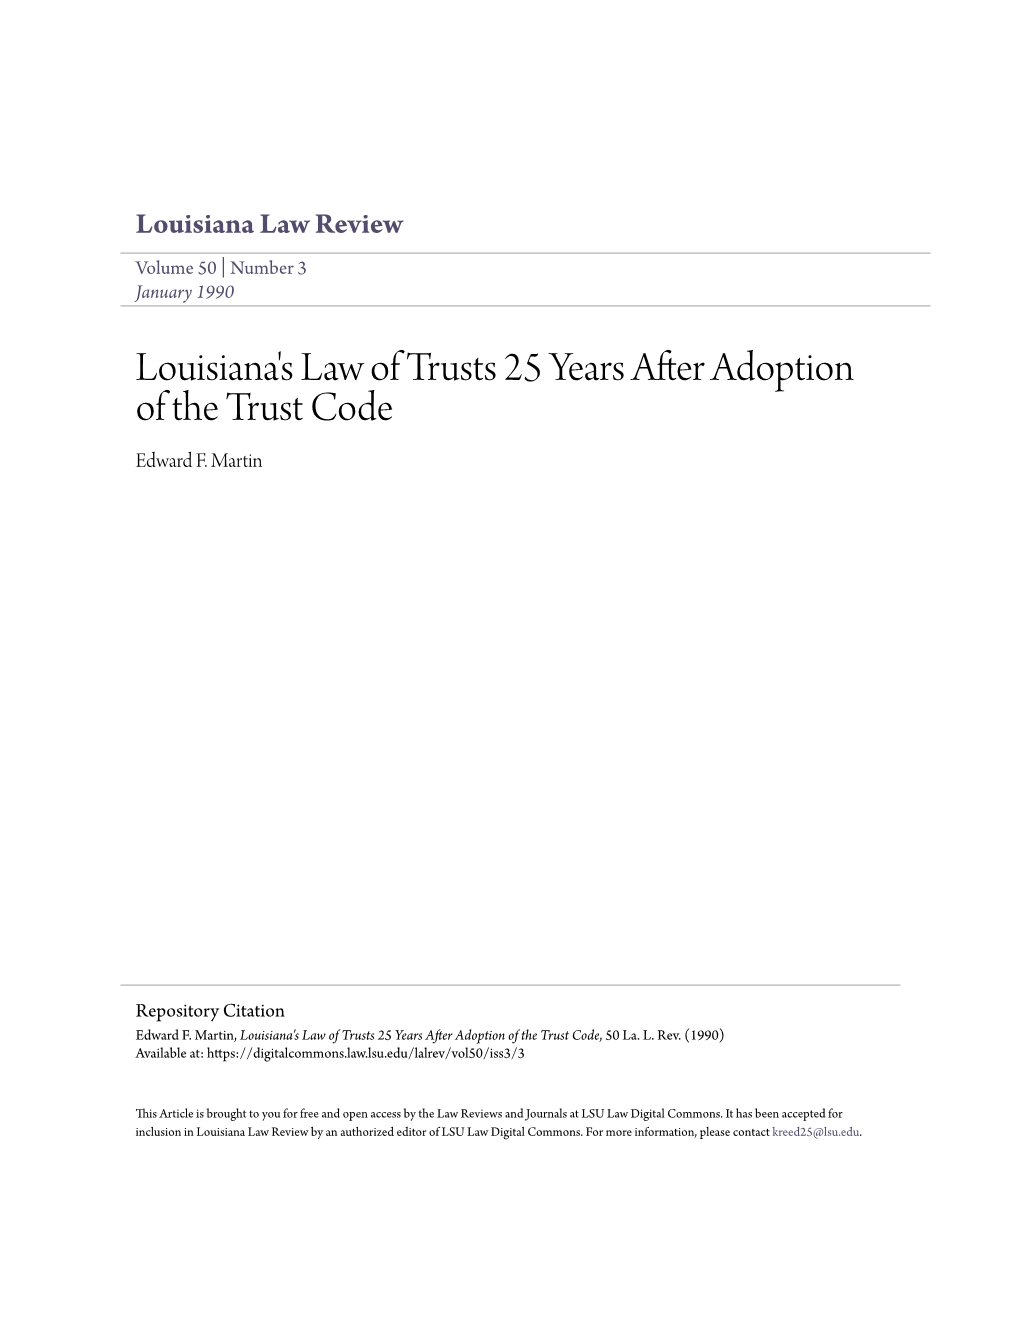 Louisiana's Law of Trusts 25 Years After Adoption of the Trust Code Edward F